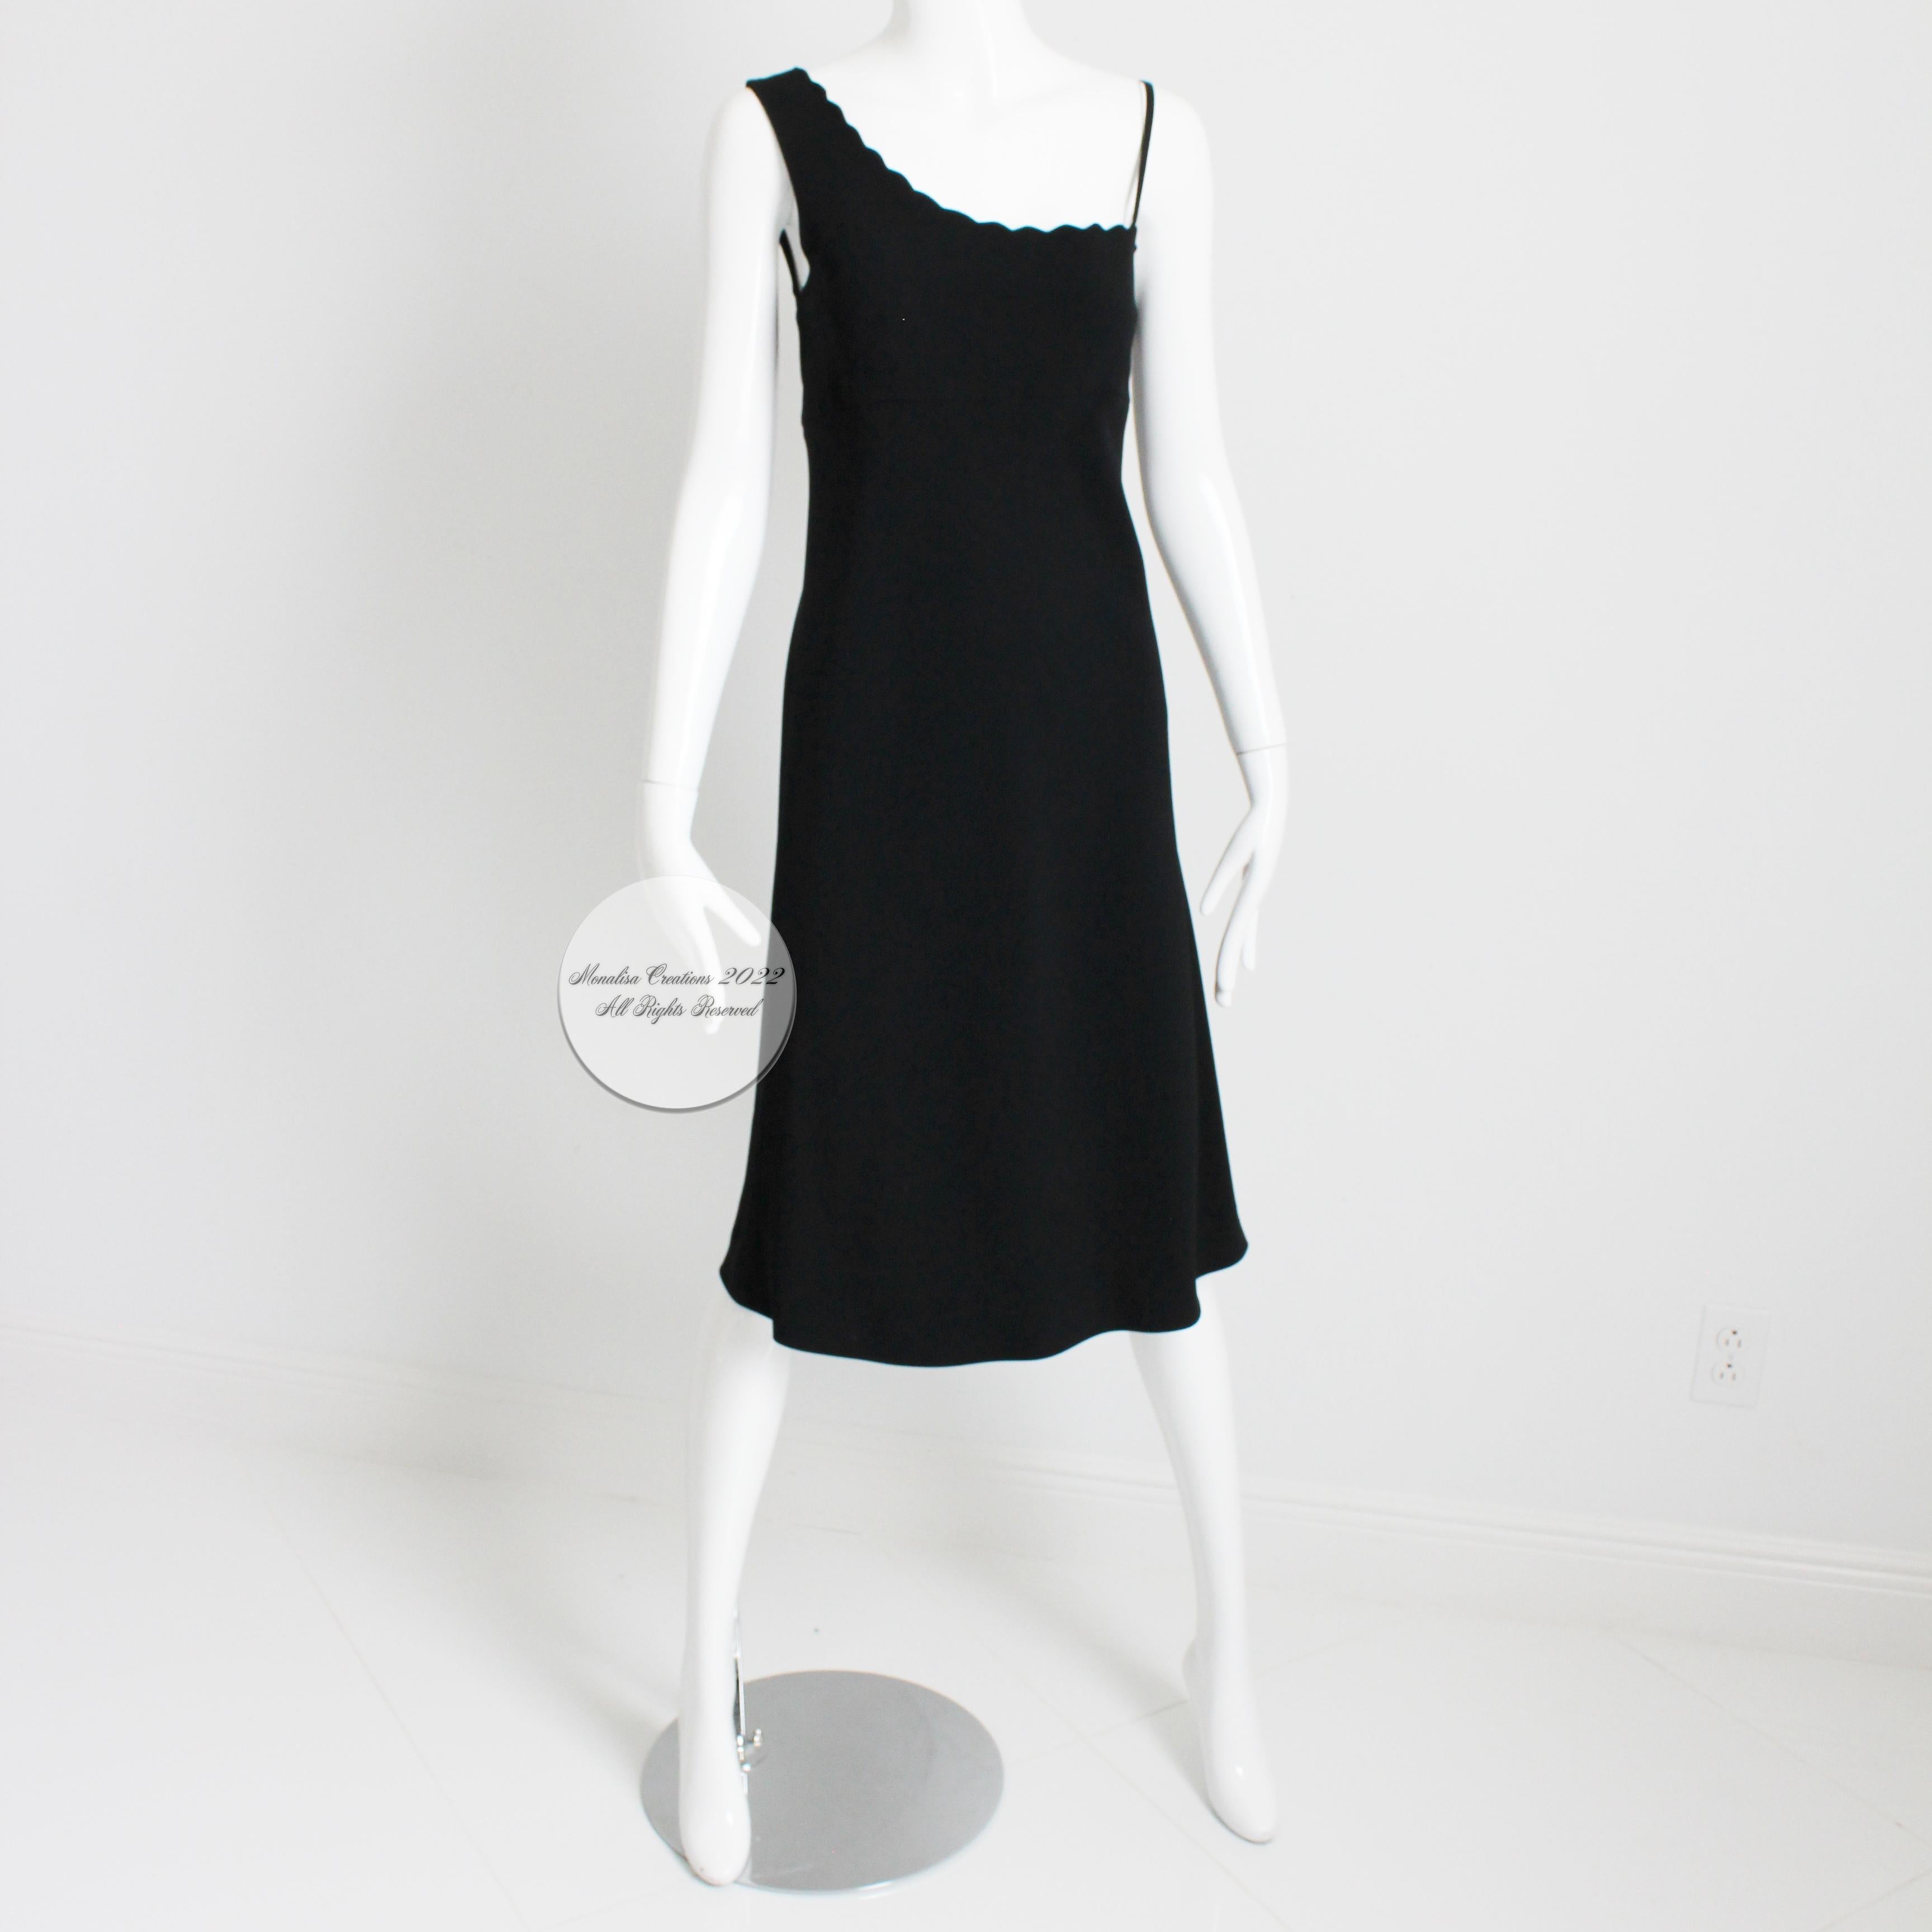 Preowned vintage Sonia Rykiel Paris little black dress, circa the 90s.  Made from a black crepe fabric (no content label, feels like a rayon blend), it fastens with a side zip, with one shoulder construction and a scalloped edge along the collar. 